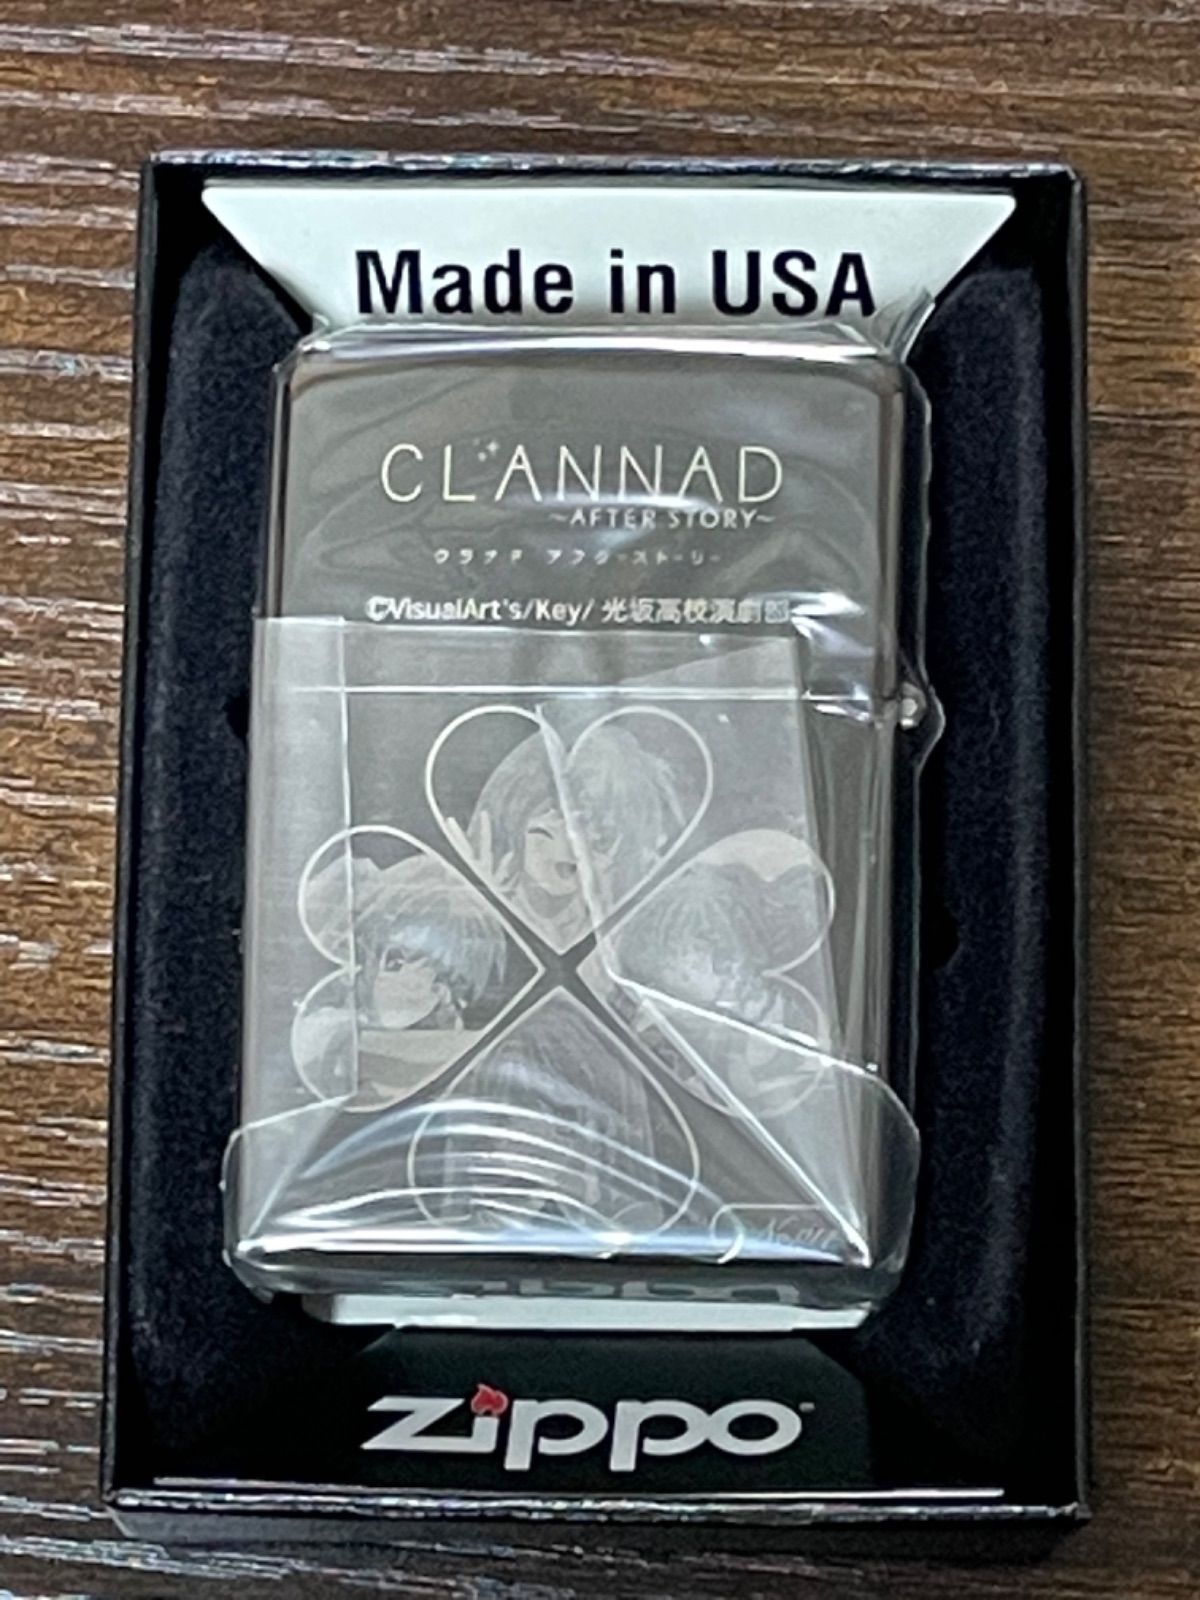 zippo CLANNAD AFTER STORY 藤林杏 クラナド アフターストーリー 2008